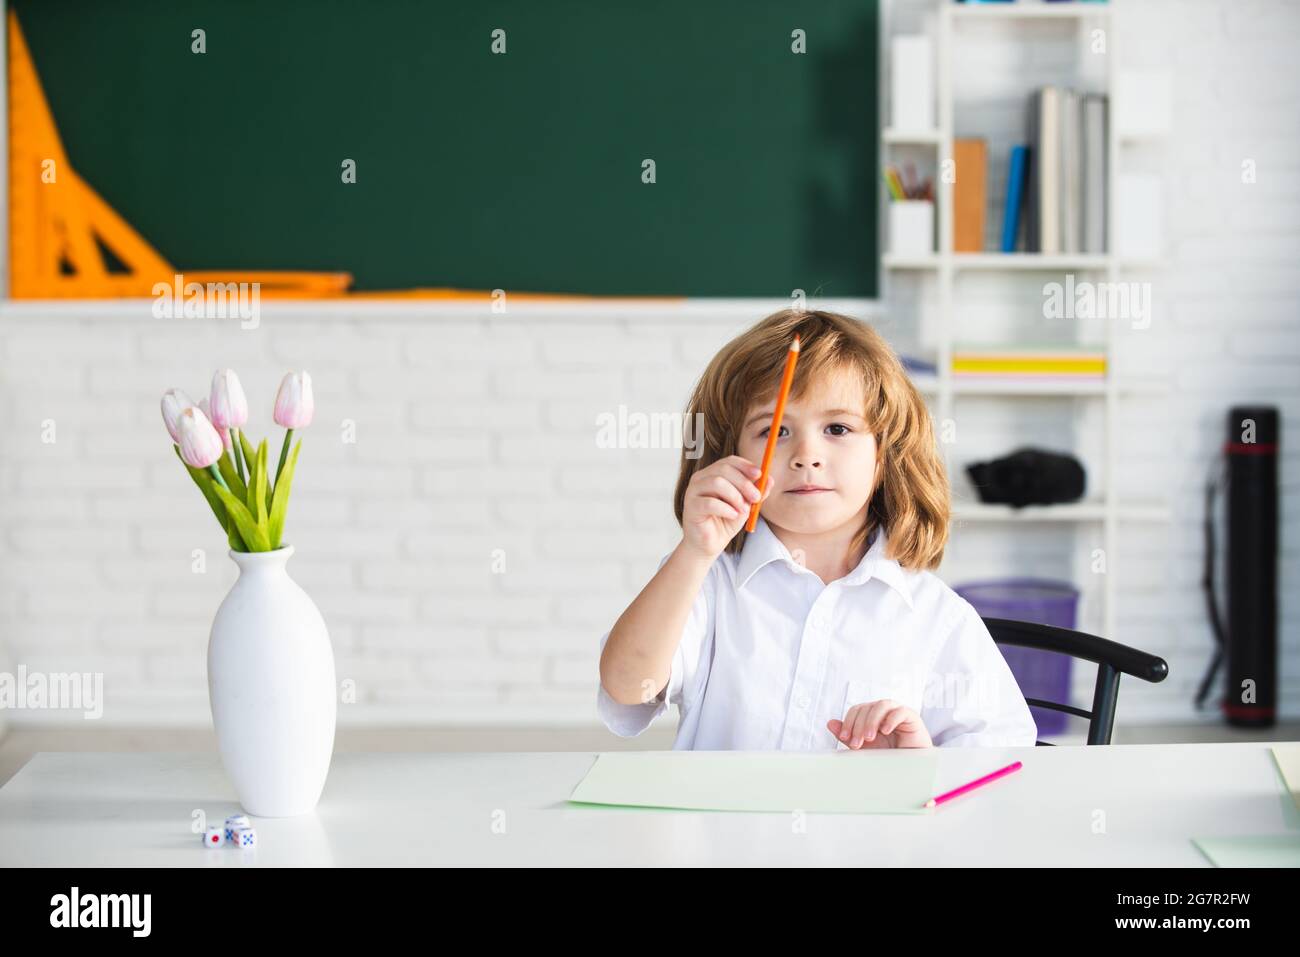 First grade. Kid studying at school. Schoolchild doing homework at classroom. Education for kids. Stock Photo